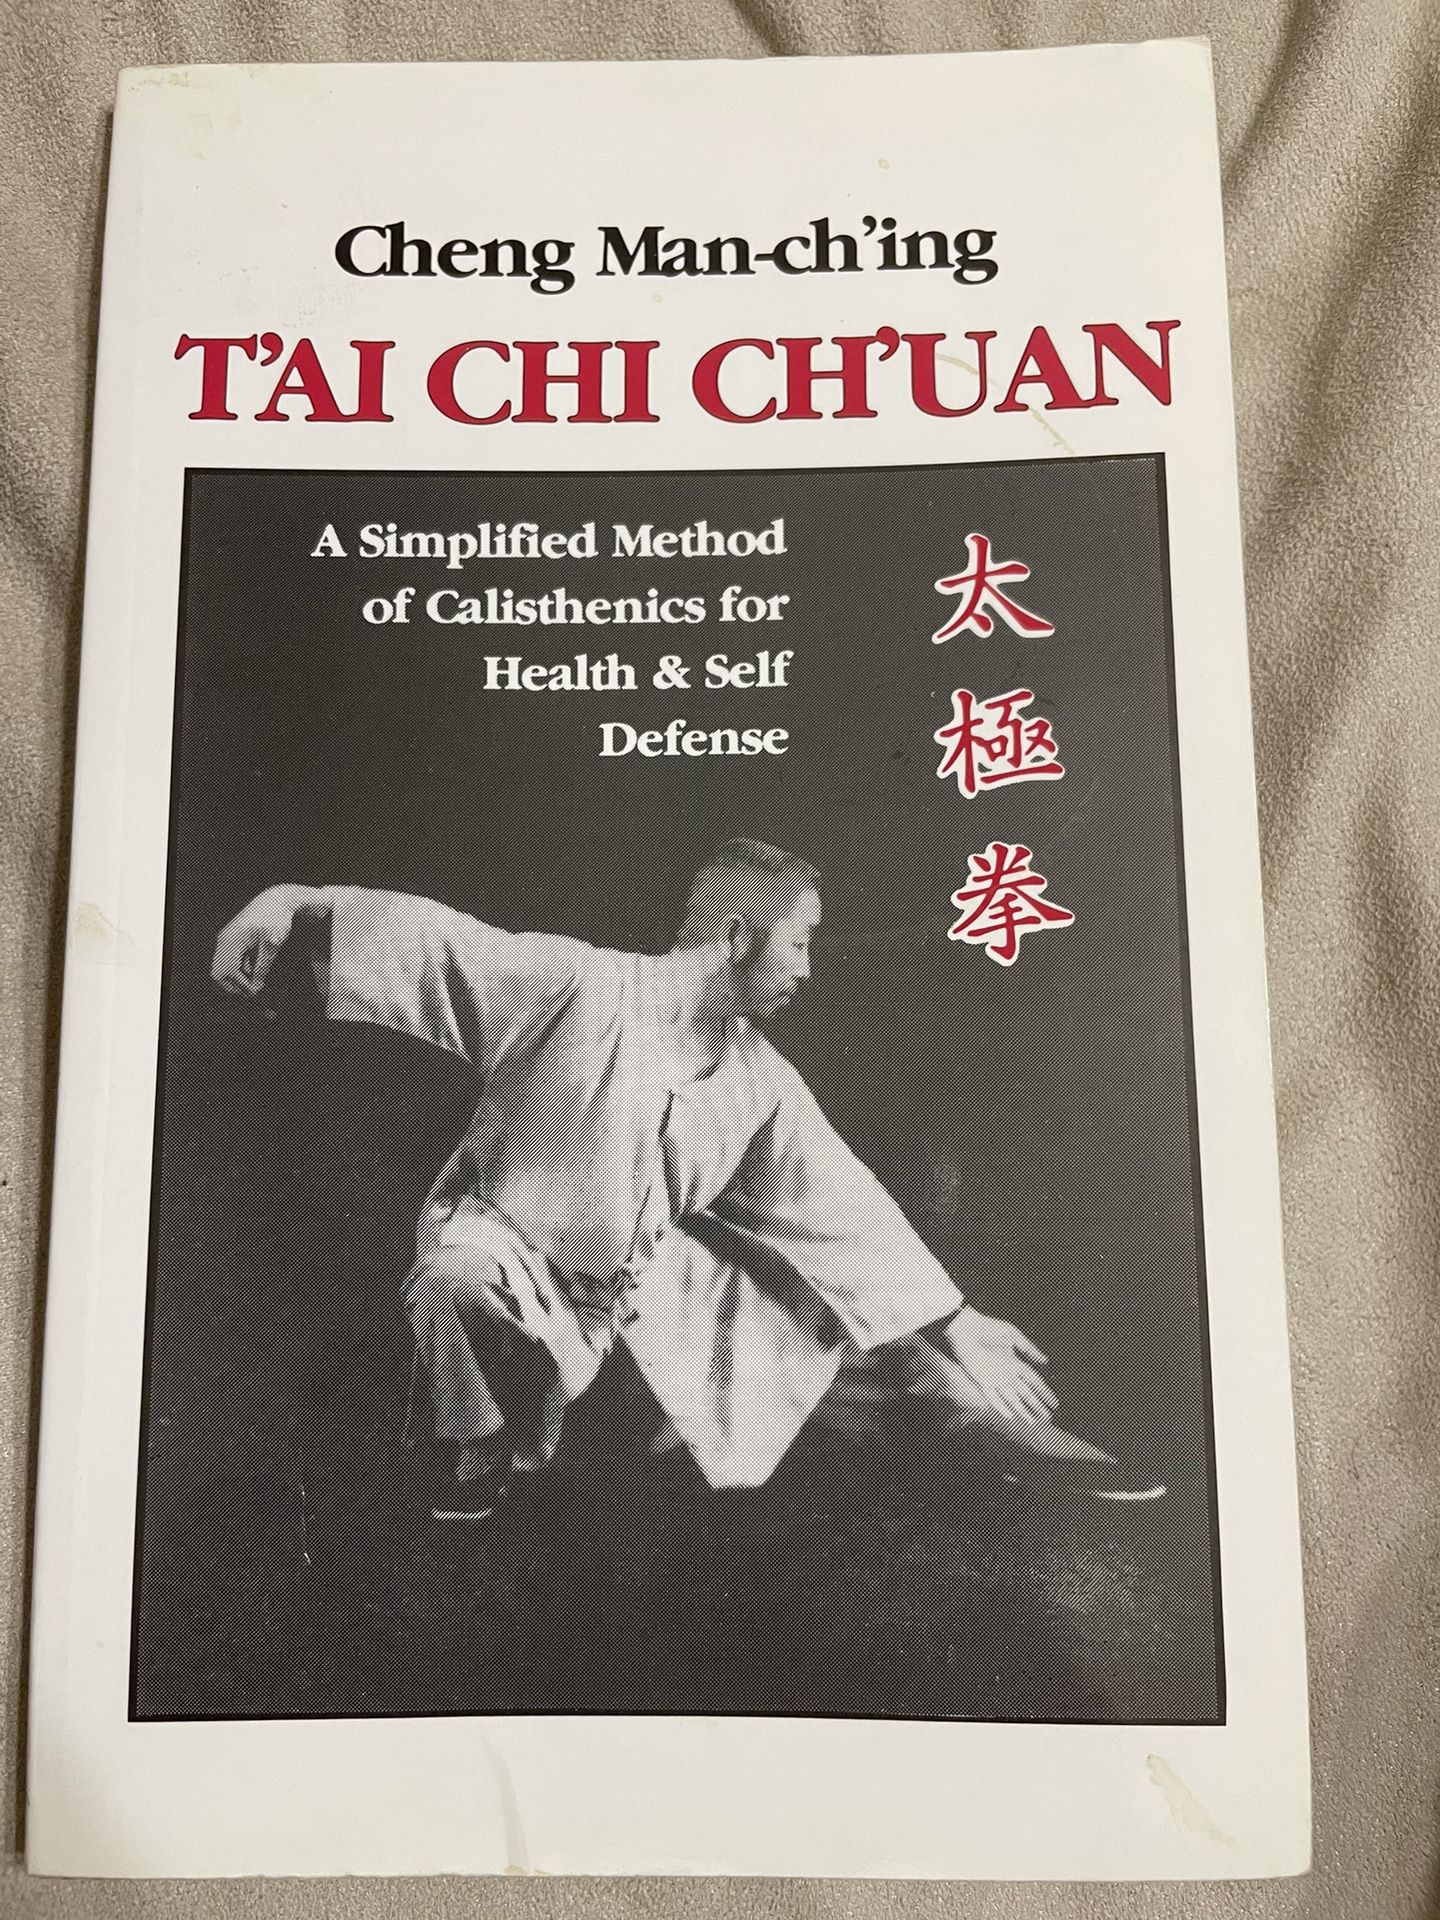 Free TAI CHI CHUAN Book Cheng Manch'ing A Simplified Method of Calisthenics for Health & Self Defense